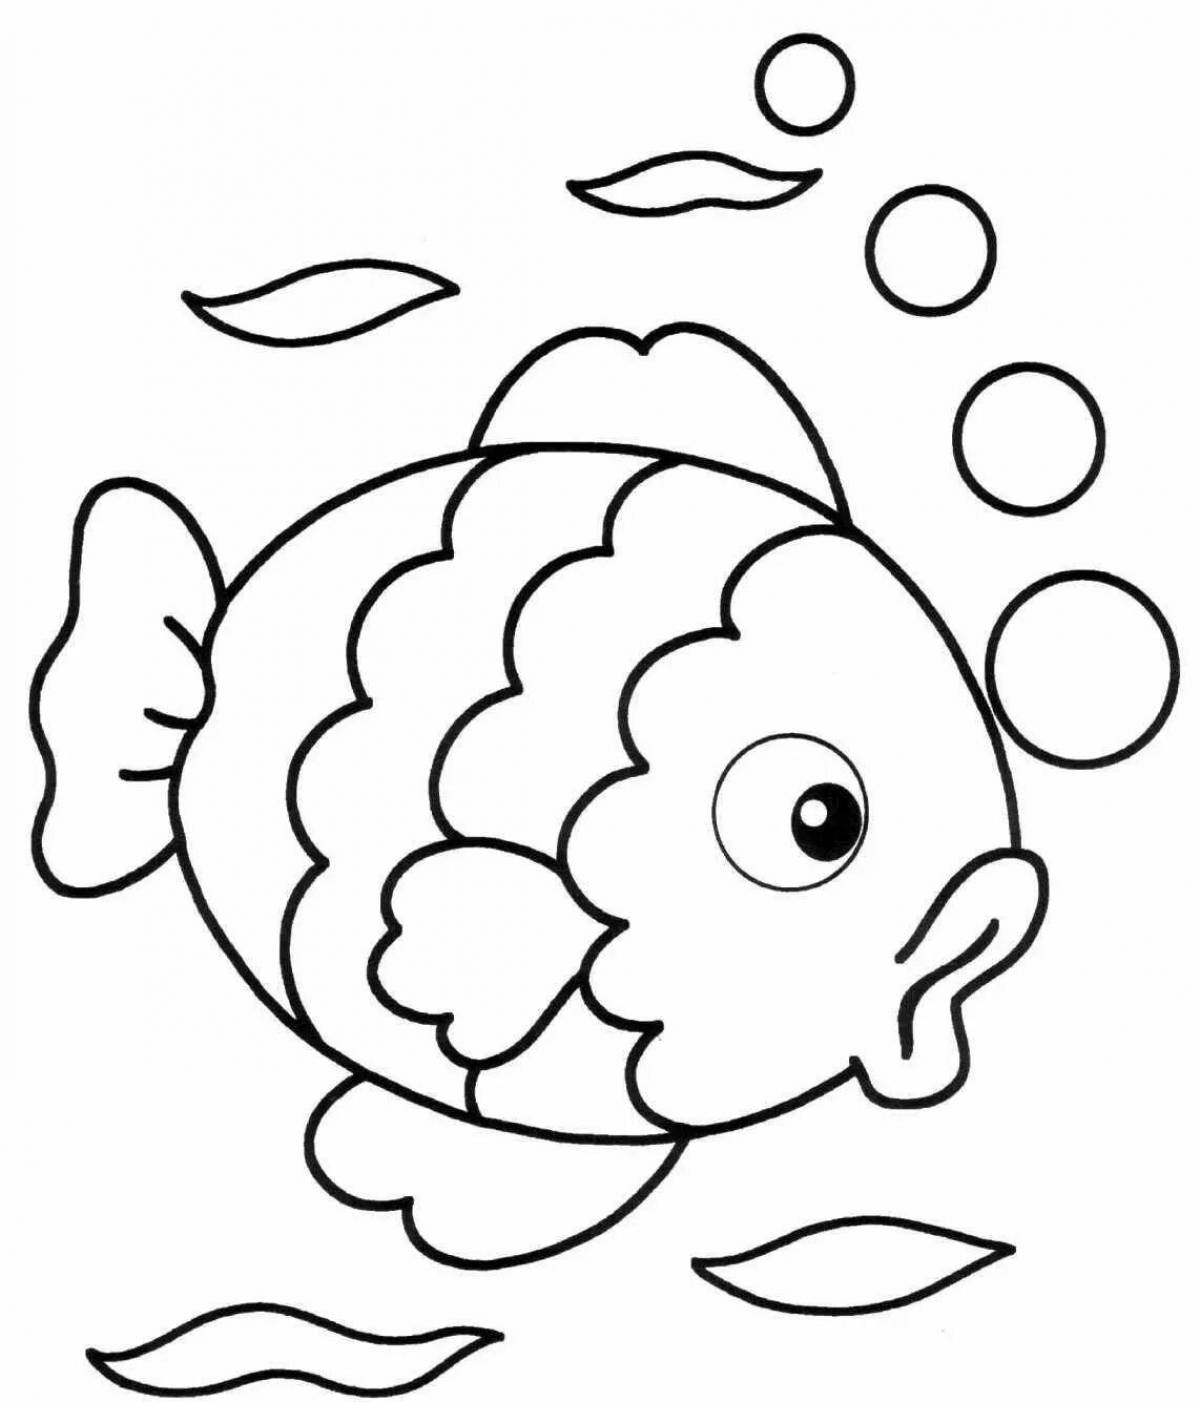 Cute fish coloring book for 2-3 year olds